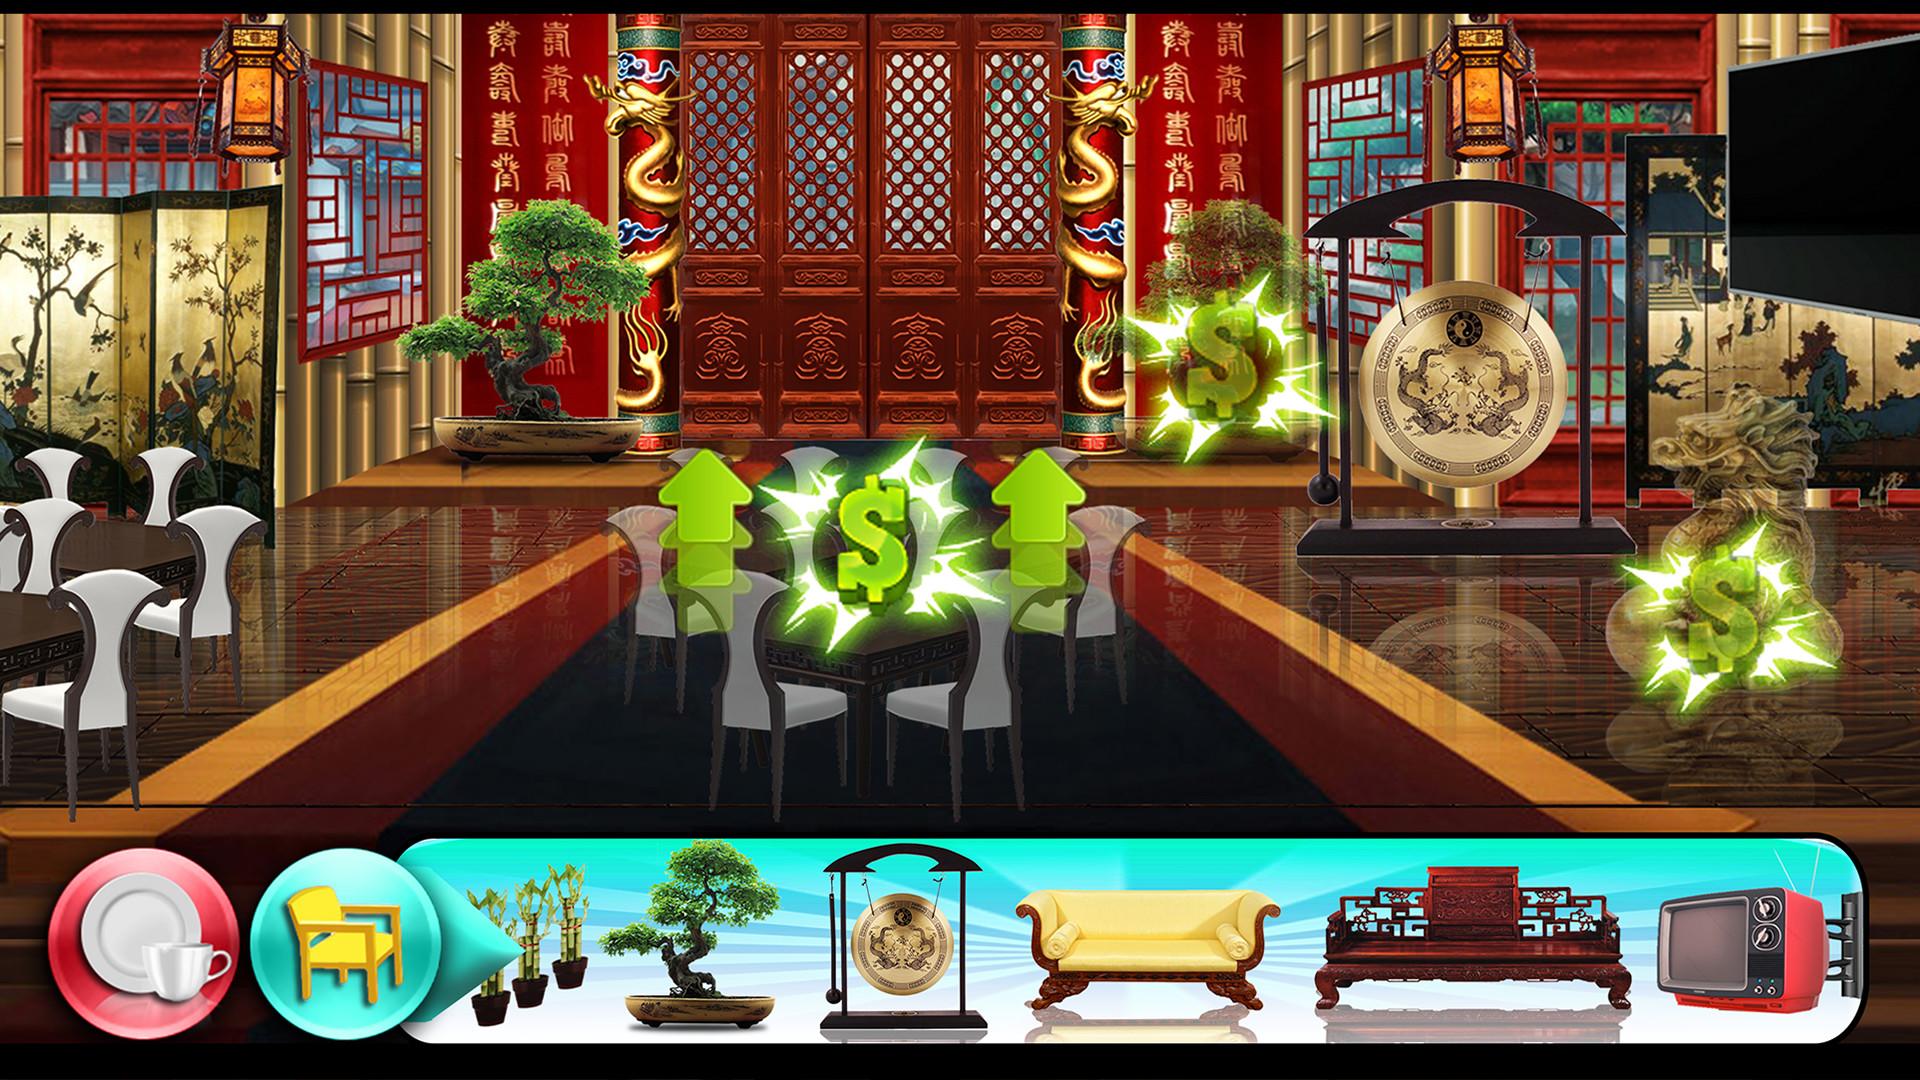 Screenshot №5 from game The Cooking Game